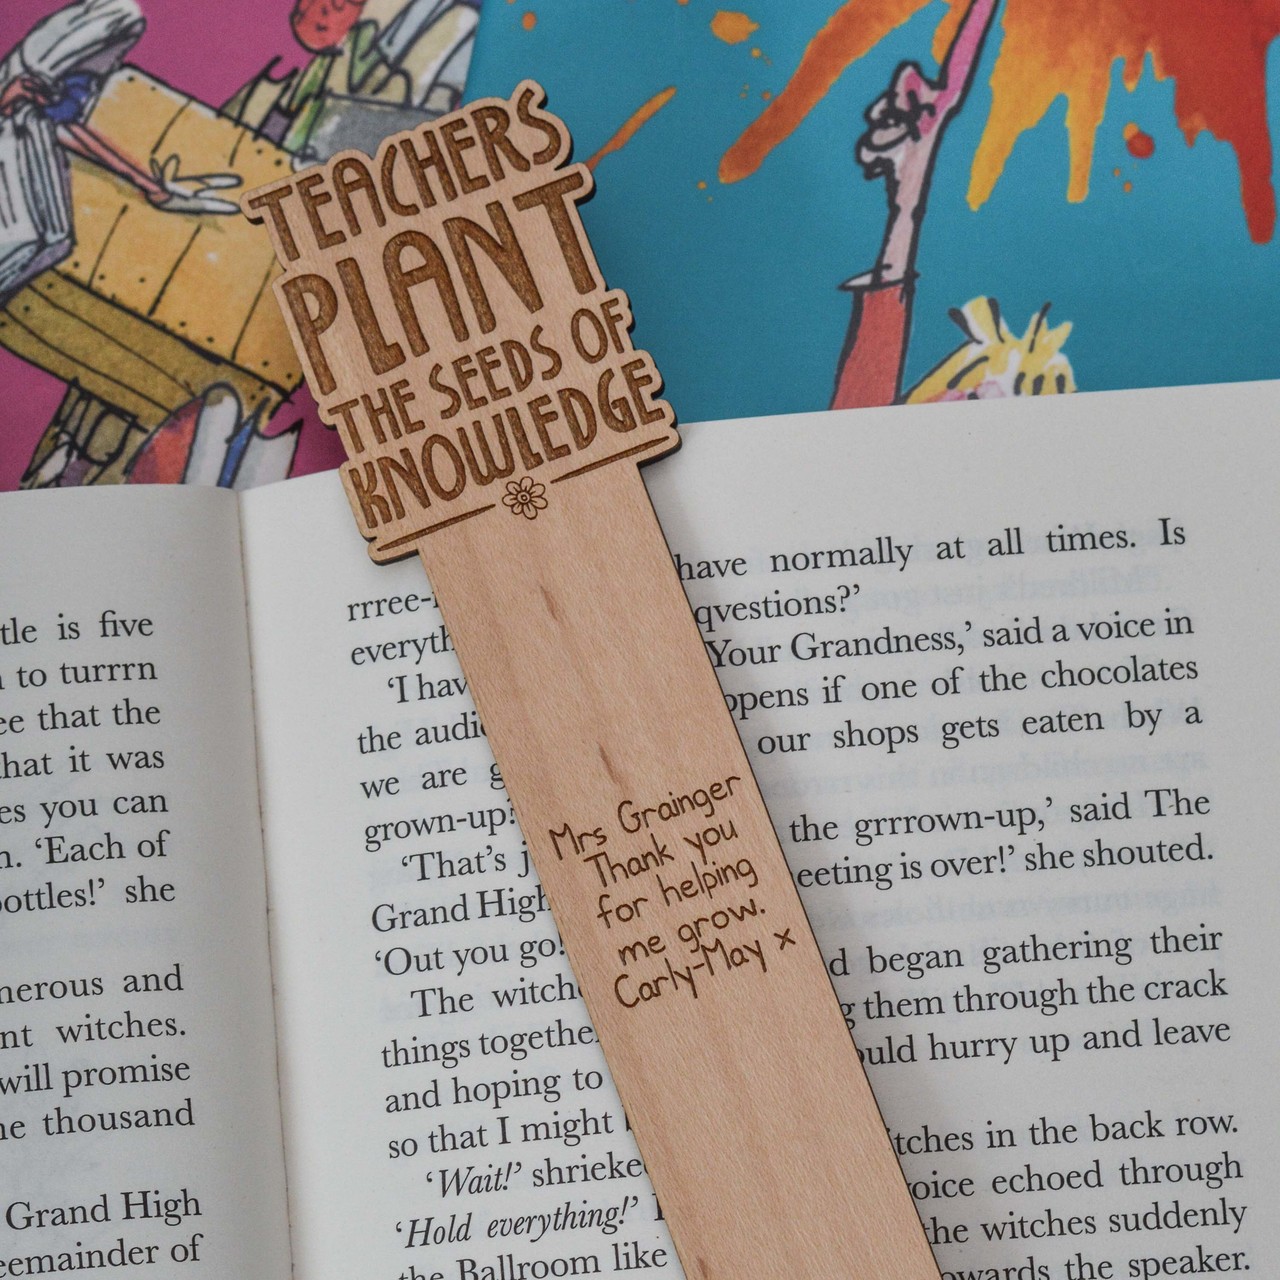 Personalised Teachers plant the seeds of knowledge Bookmark